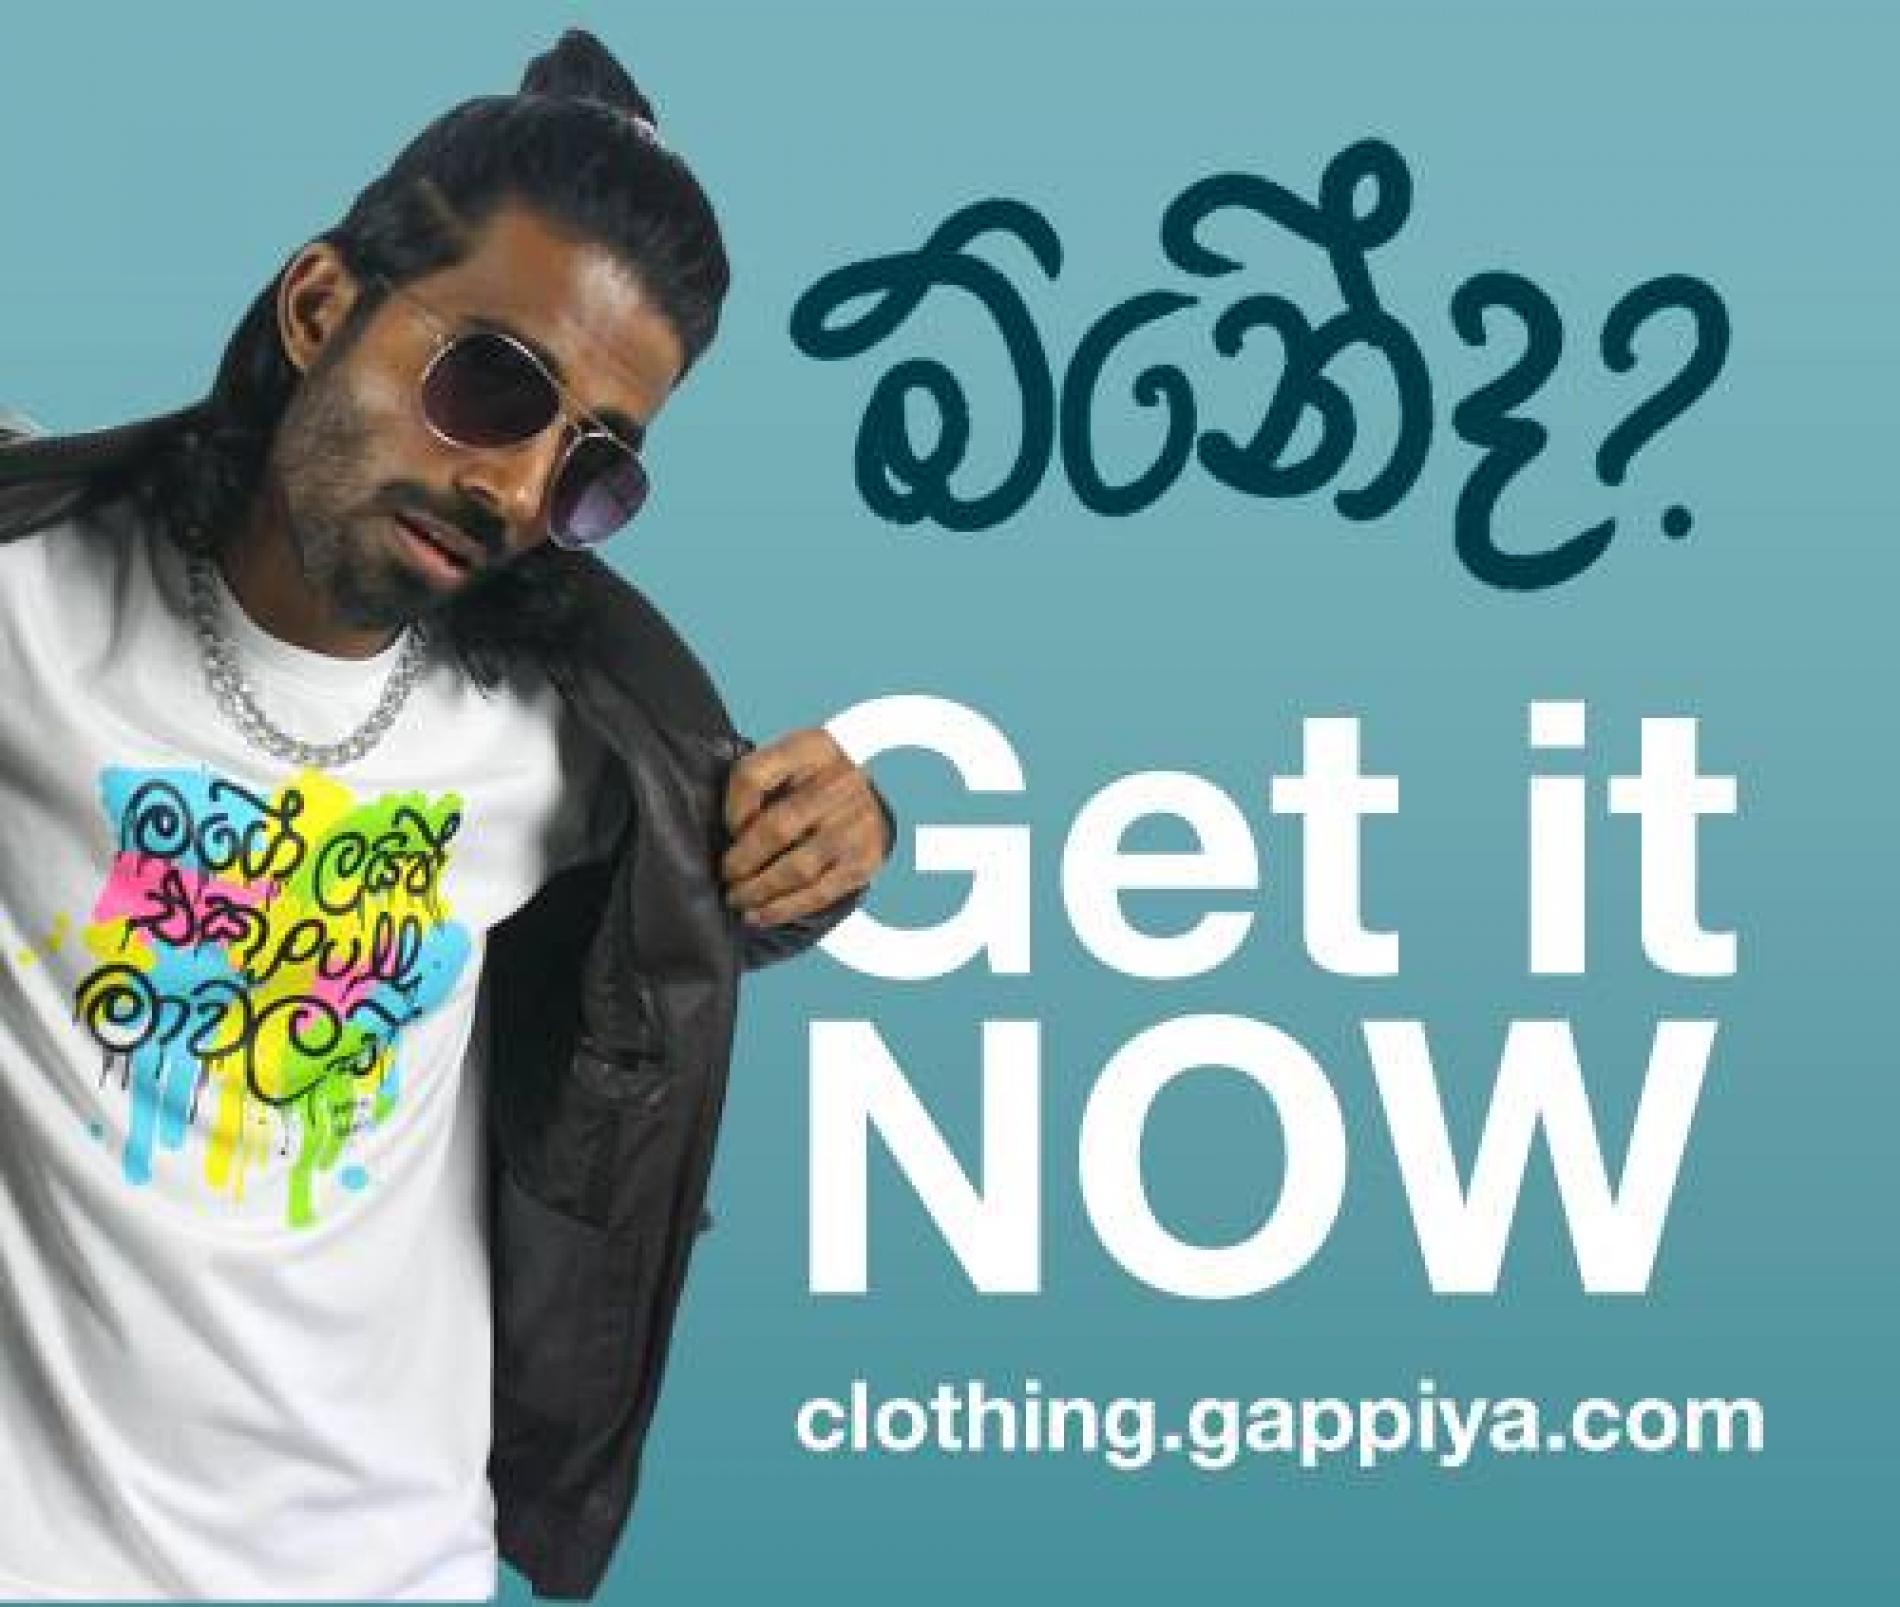 Gappiya Has Awesome Merch, Wants You To Get OWN It!